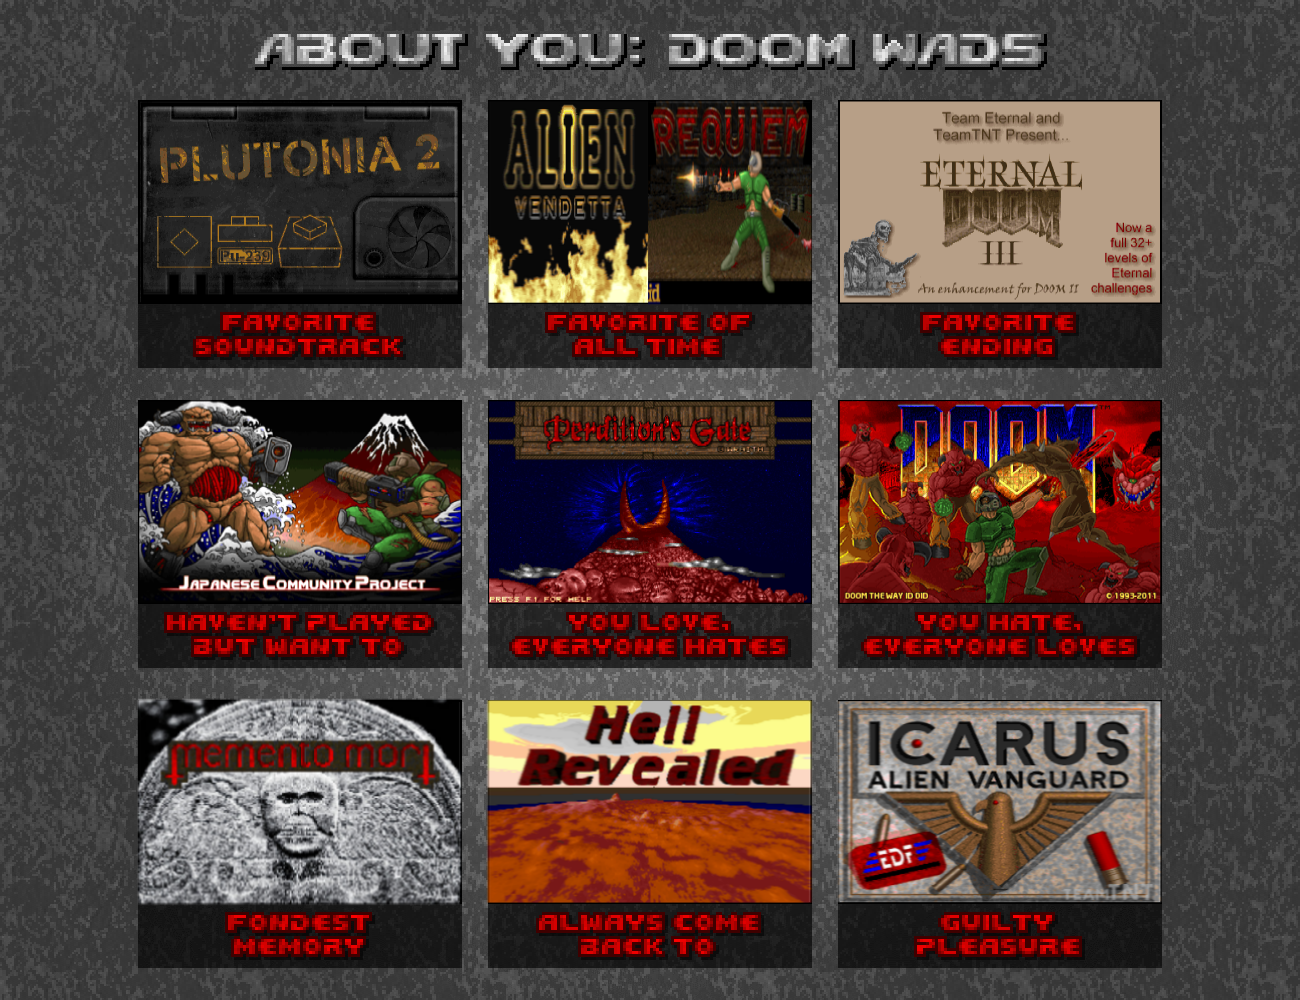 my_important_doom_wads.png